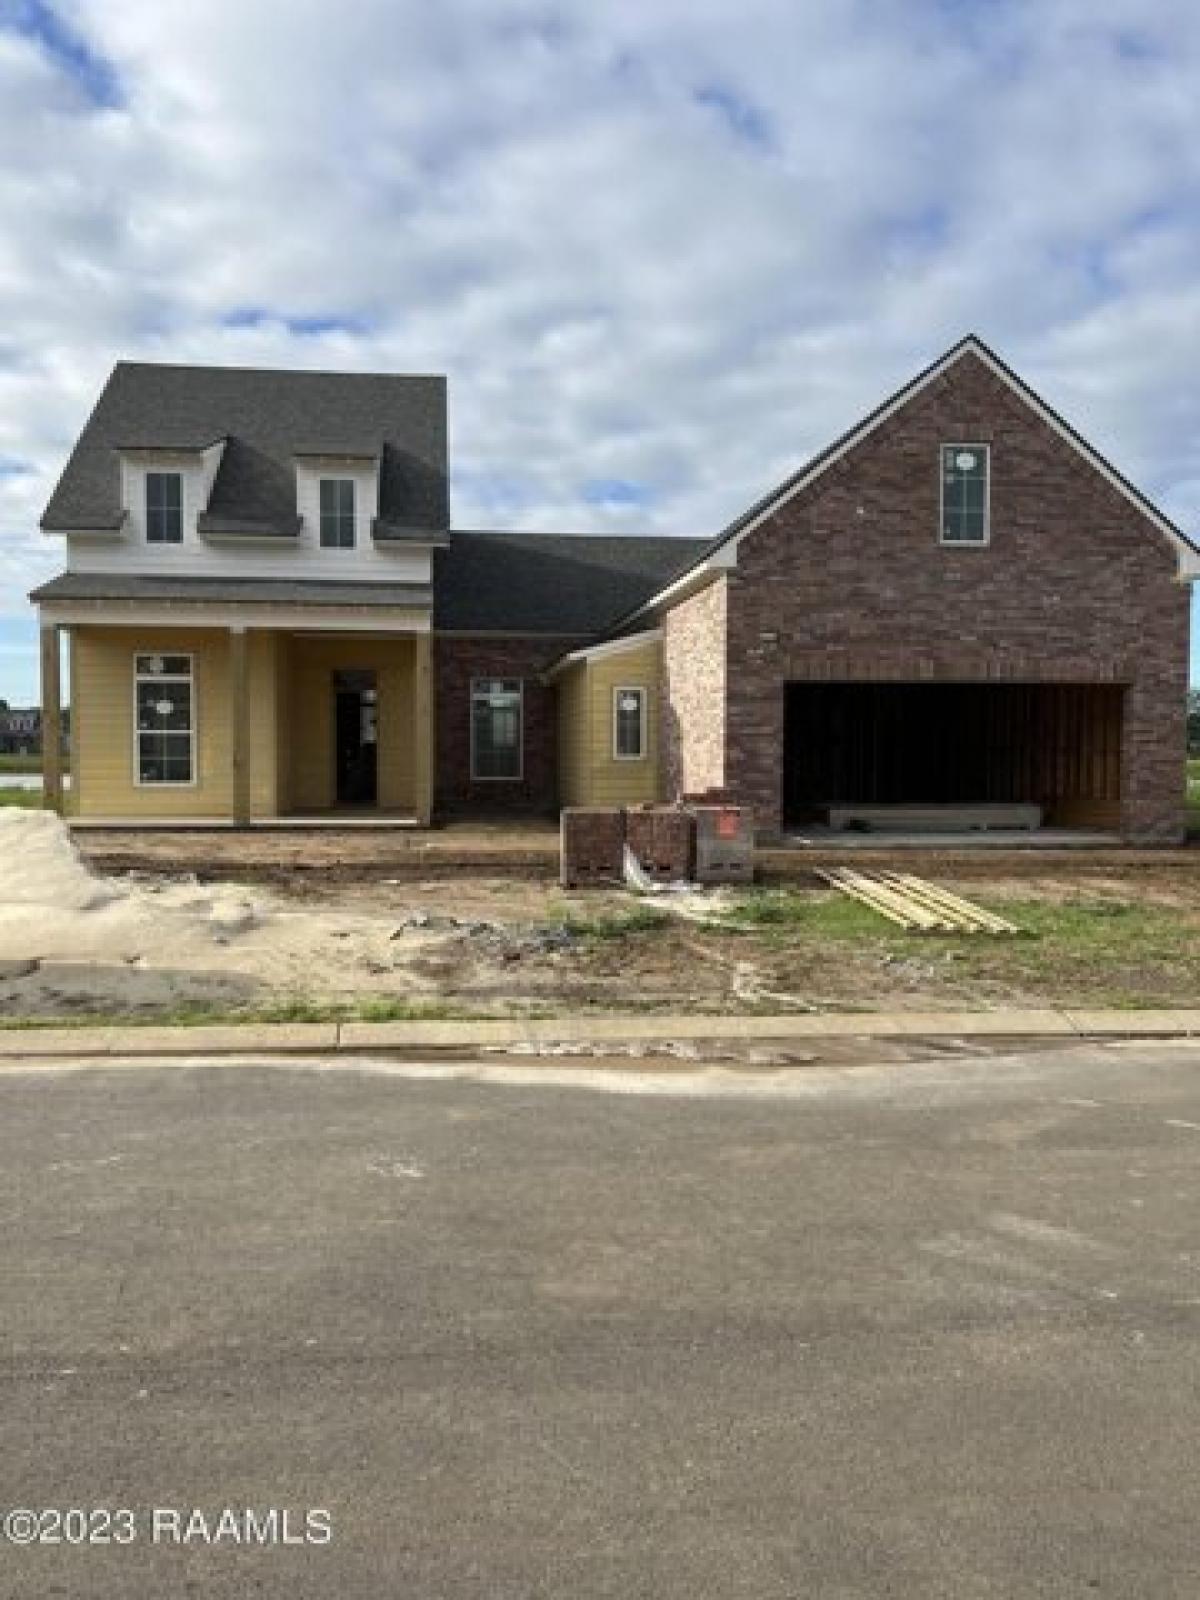 Picture of Home For Sale in Youngsville, Louisiana, United States